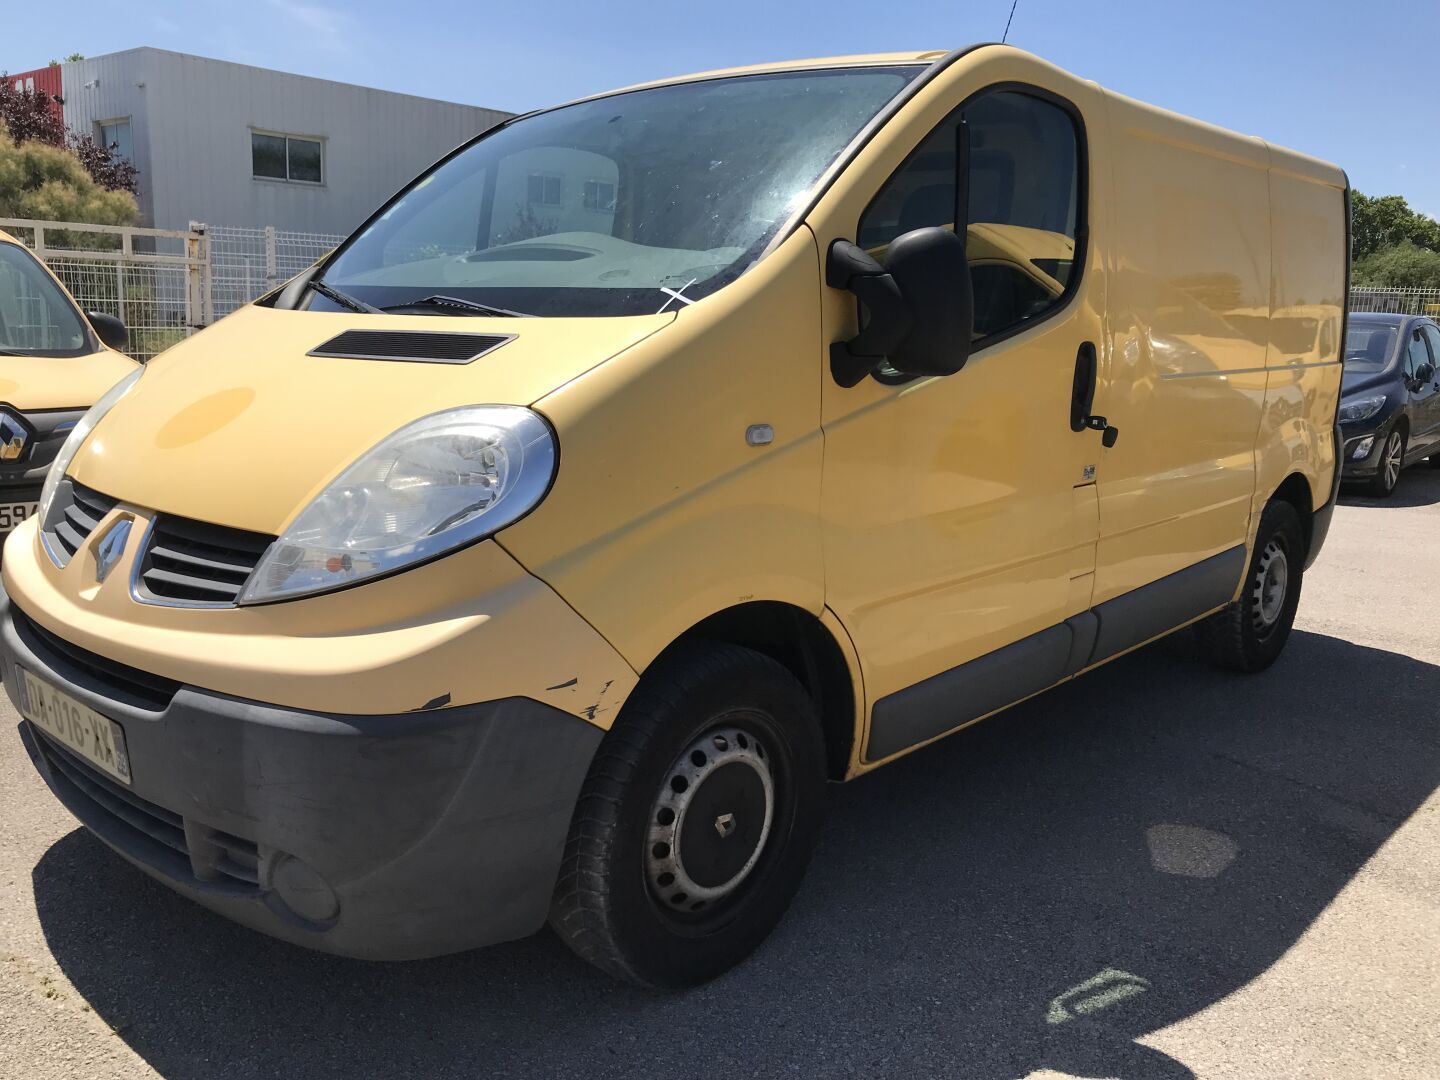 Null TRAFIC 2.0 DCI 90ch
CTTE RENAULT TRAFIC 2.0 DCI 90ch 2.0 DCI
Carrosserie : &hellip;